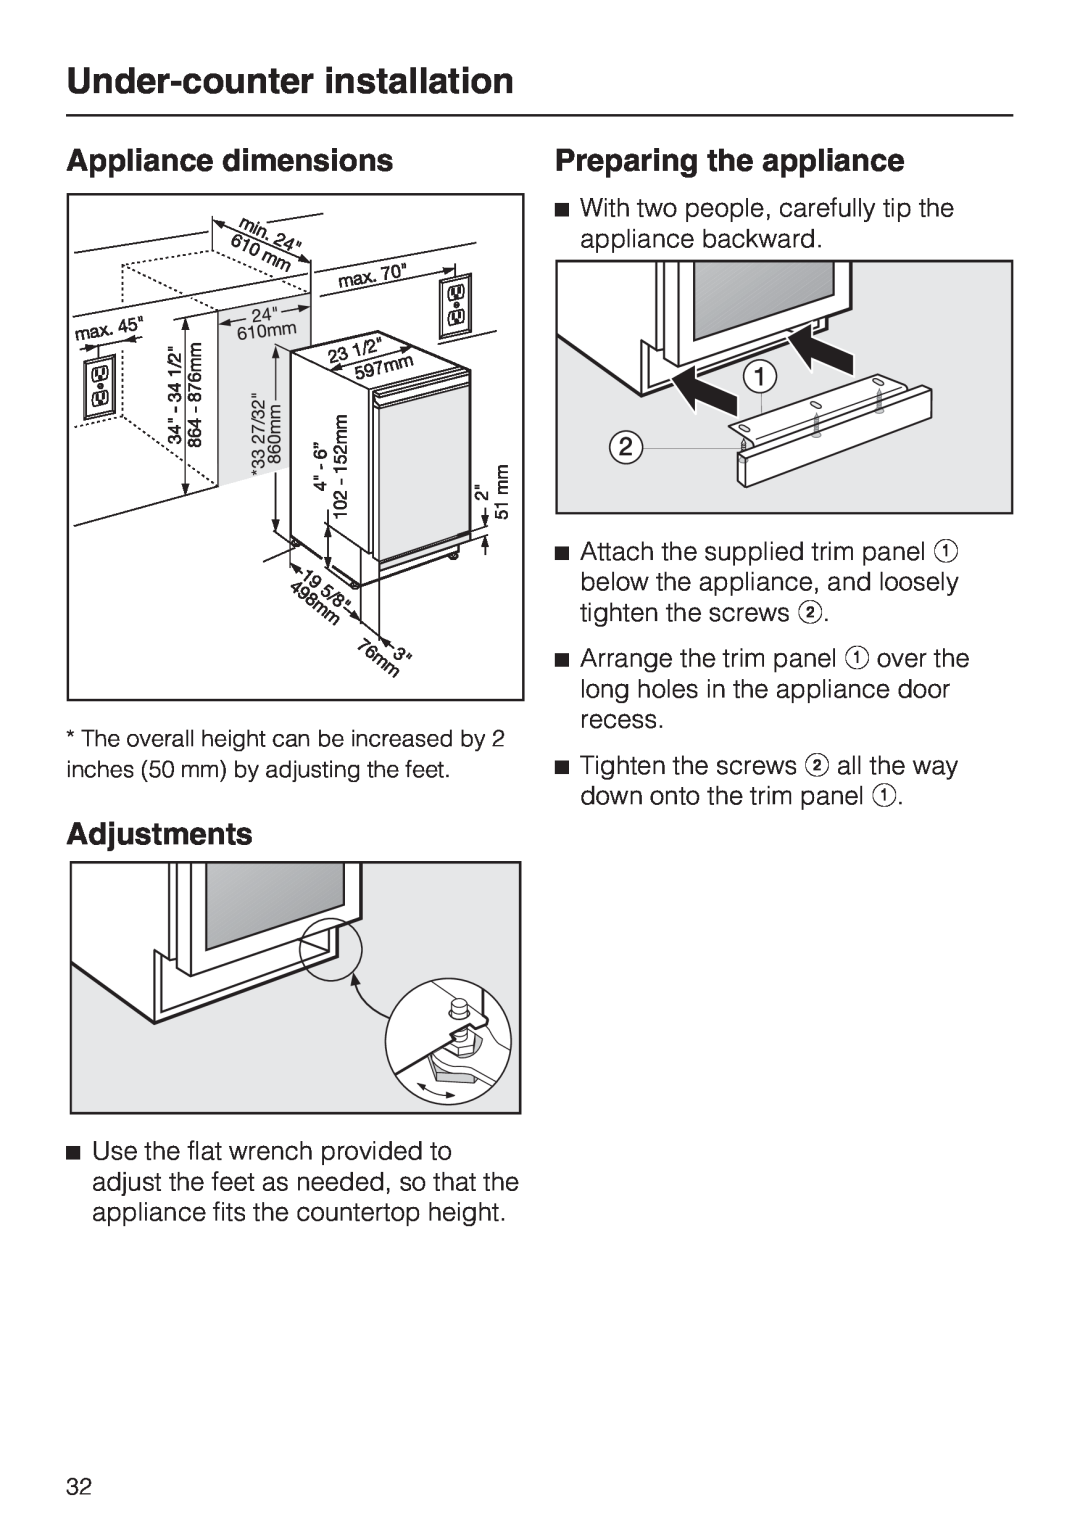 Miele KWT4154UG1 Under-counterinstallation, Appliance dimensions, Adjustments, Preparing the appliance 